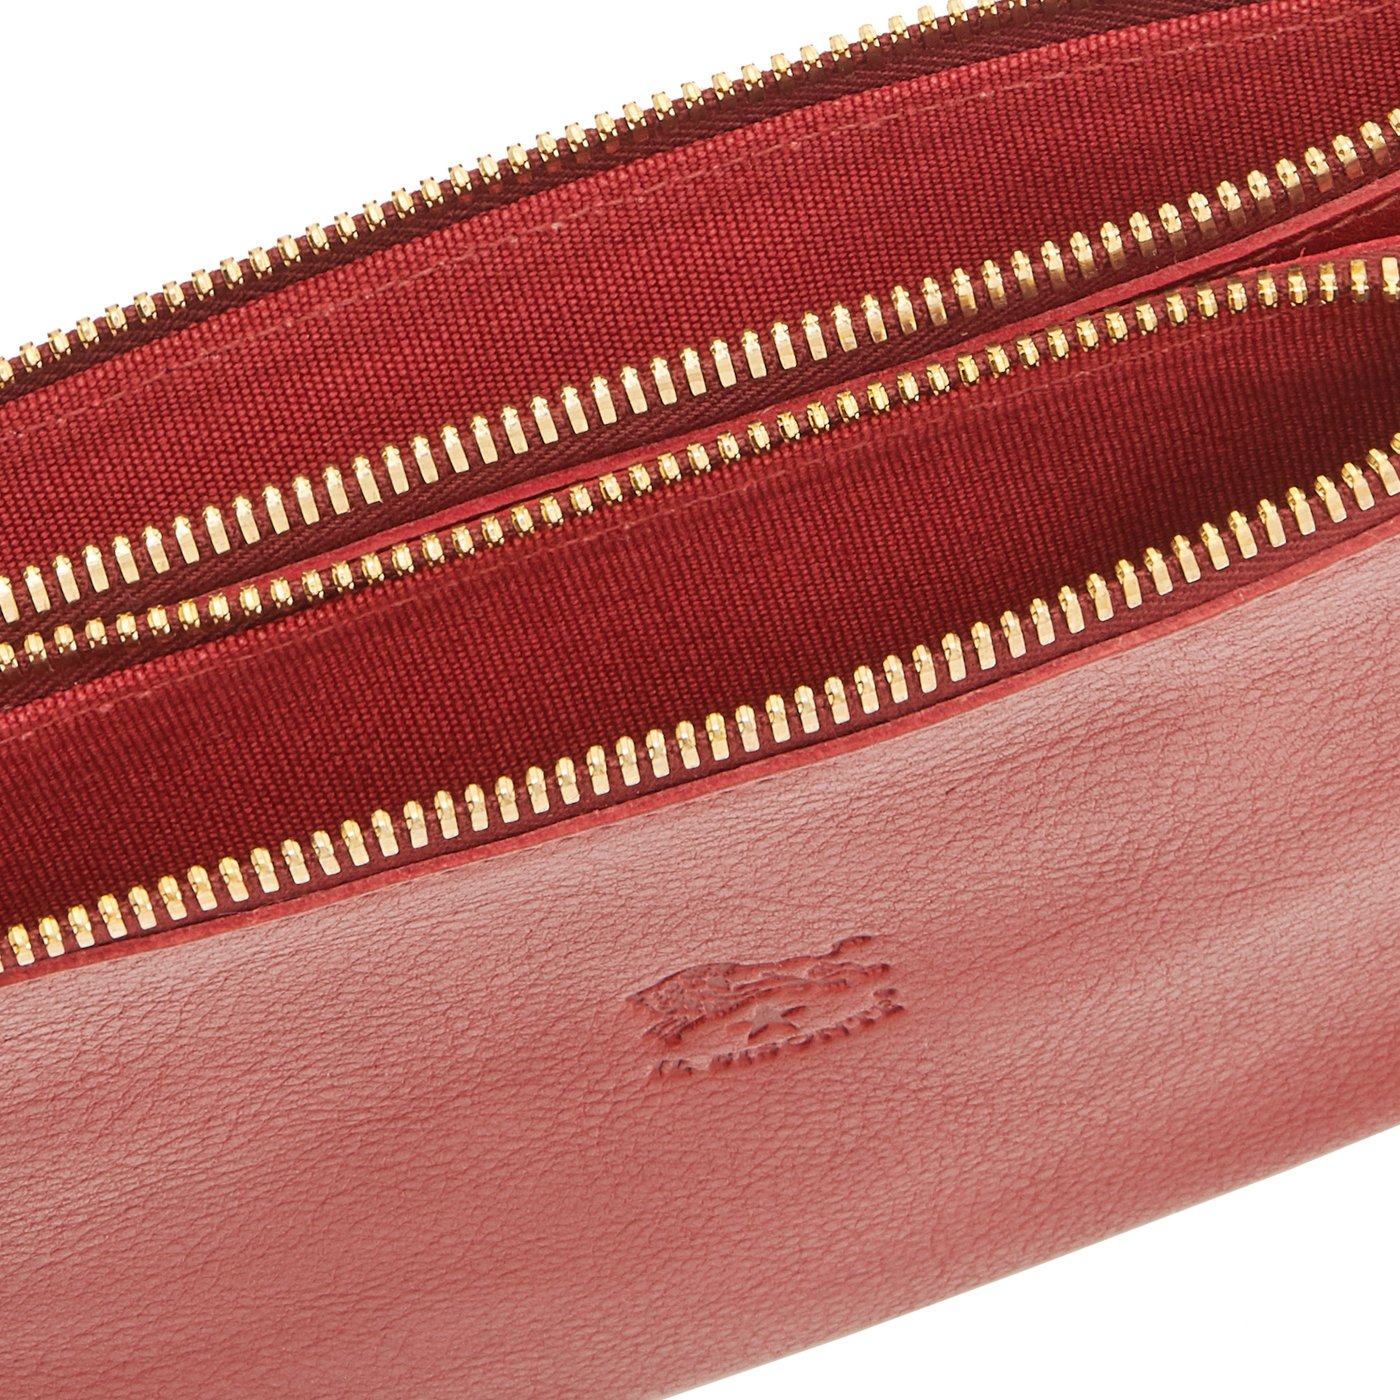 Talamone | Women's clutch bag in leather color red